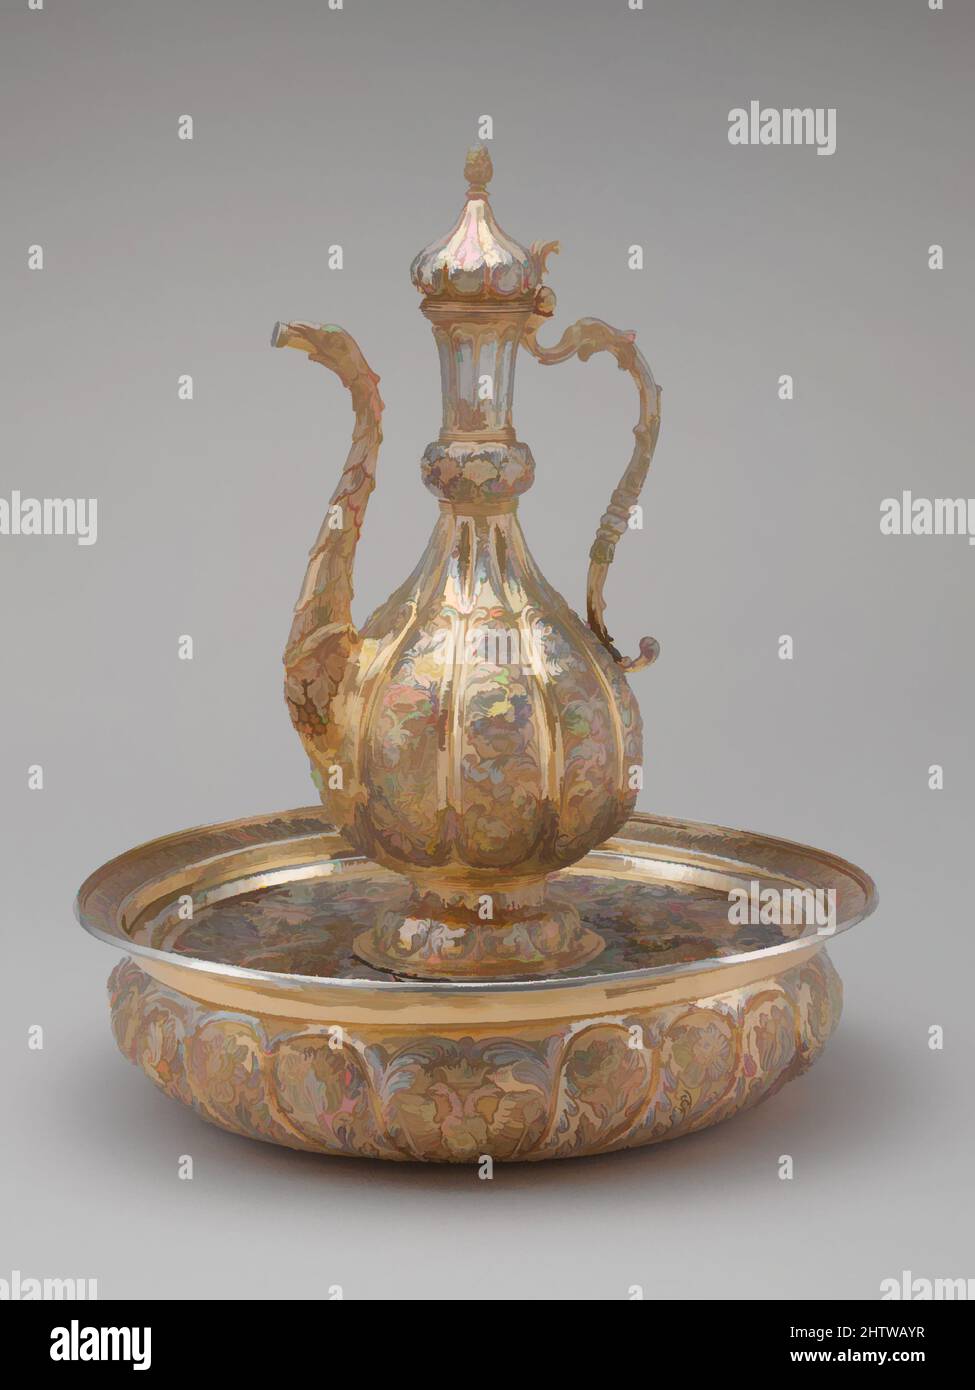 Art inspired by Ewer and basin (lavabo set), ca. 1680–85, Moldovan, Silver, partially gilded, H.: 20 1/4 in., Diam.: 15 1/4 in., Wt.: 9.7lb. (51.4 cm, 38.7 cm, 4.4kg,), Metalwork-Silver, Uniting the ornate Northern Baroque floral style with the exotic shape of Islamic objects, this, Classic works modernized by Artotop with a splash of modernity. Shapes, color and value, eye-catching visual impact on art. Emotions through freedom of artworks in a contemporary way. A timeless message pursuing a wildly creative new direction. Artists turning to the digital medium and creating the Artotop NFT Stock Photo